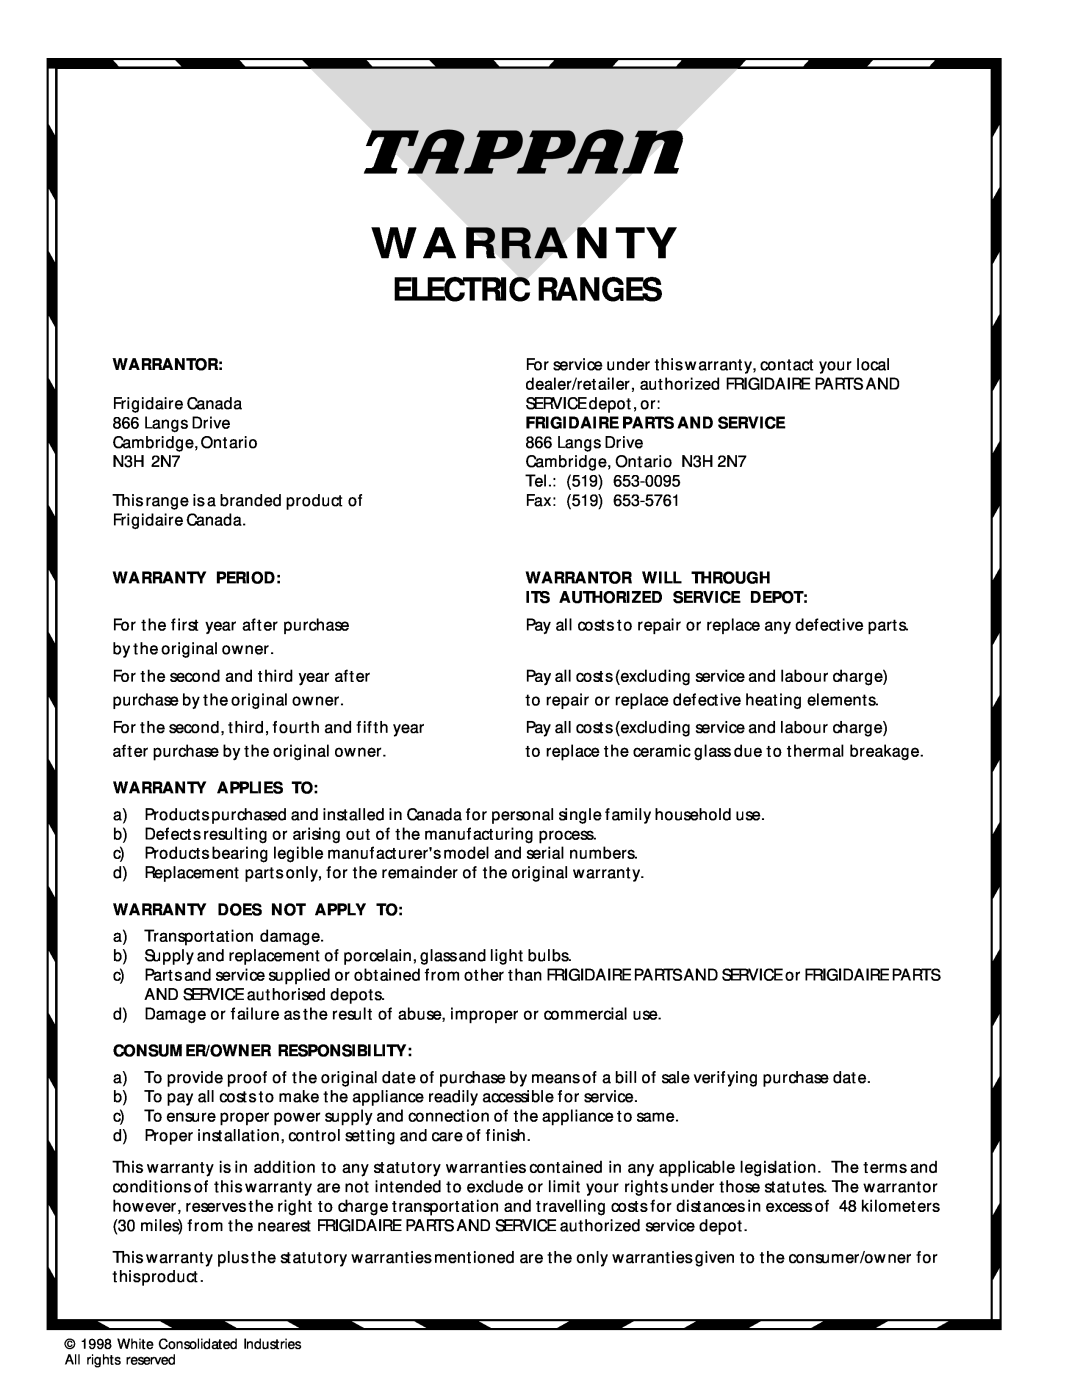 Tappan 318200409 warranty Electric Ranges, Frigidaire Parts And Service, Warranty Period, Warrantor Will Through 